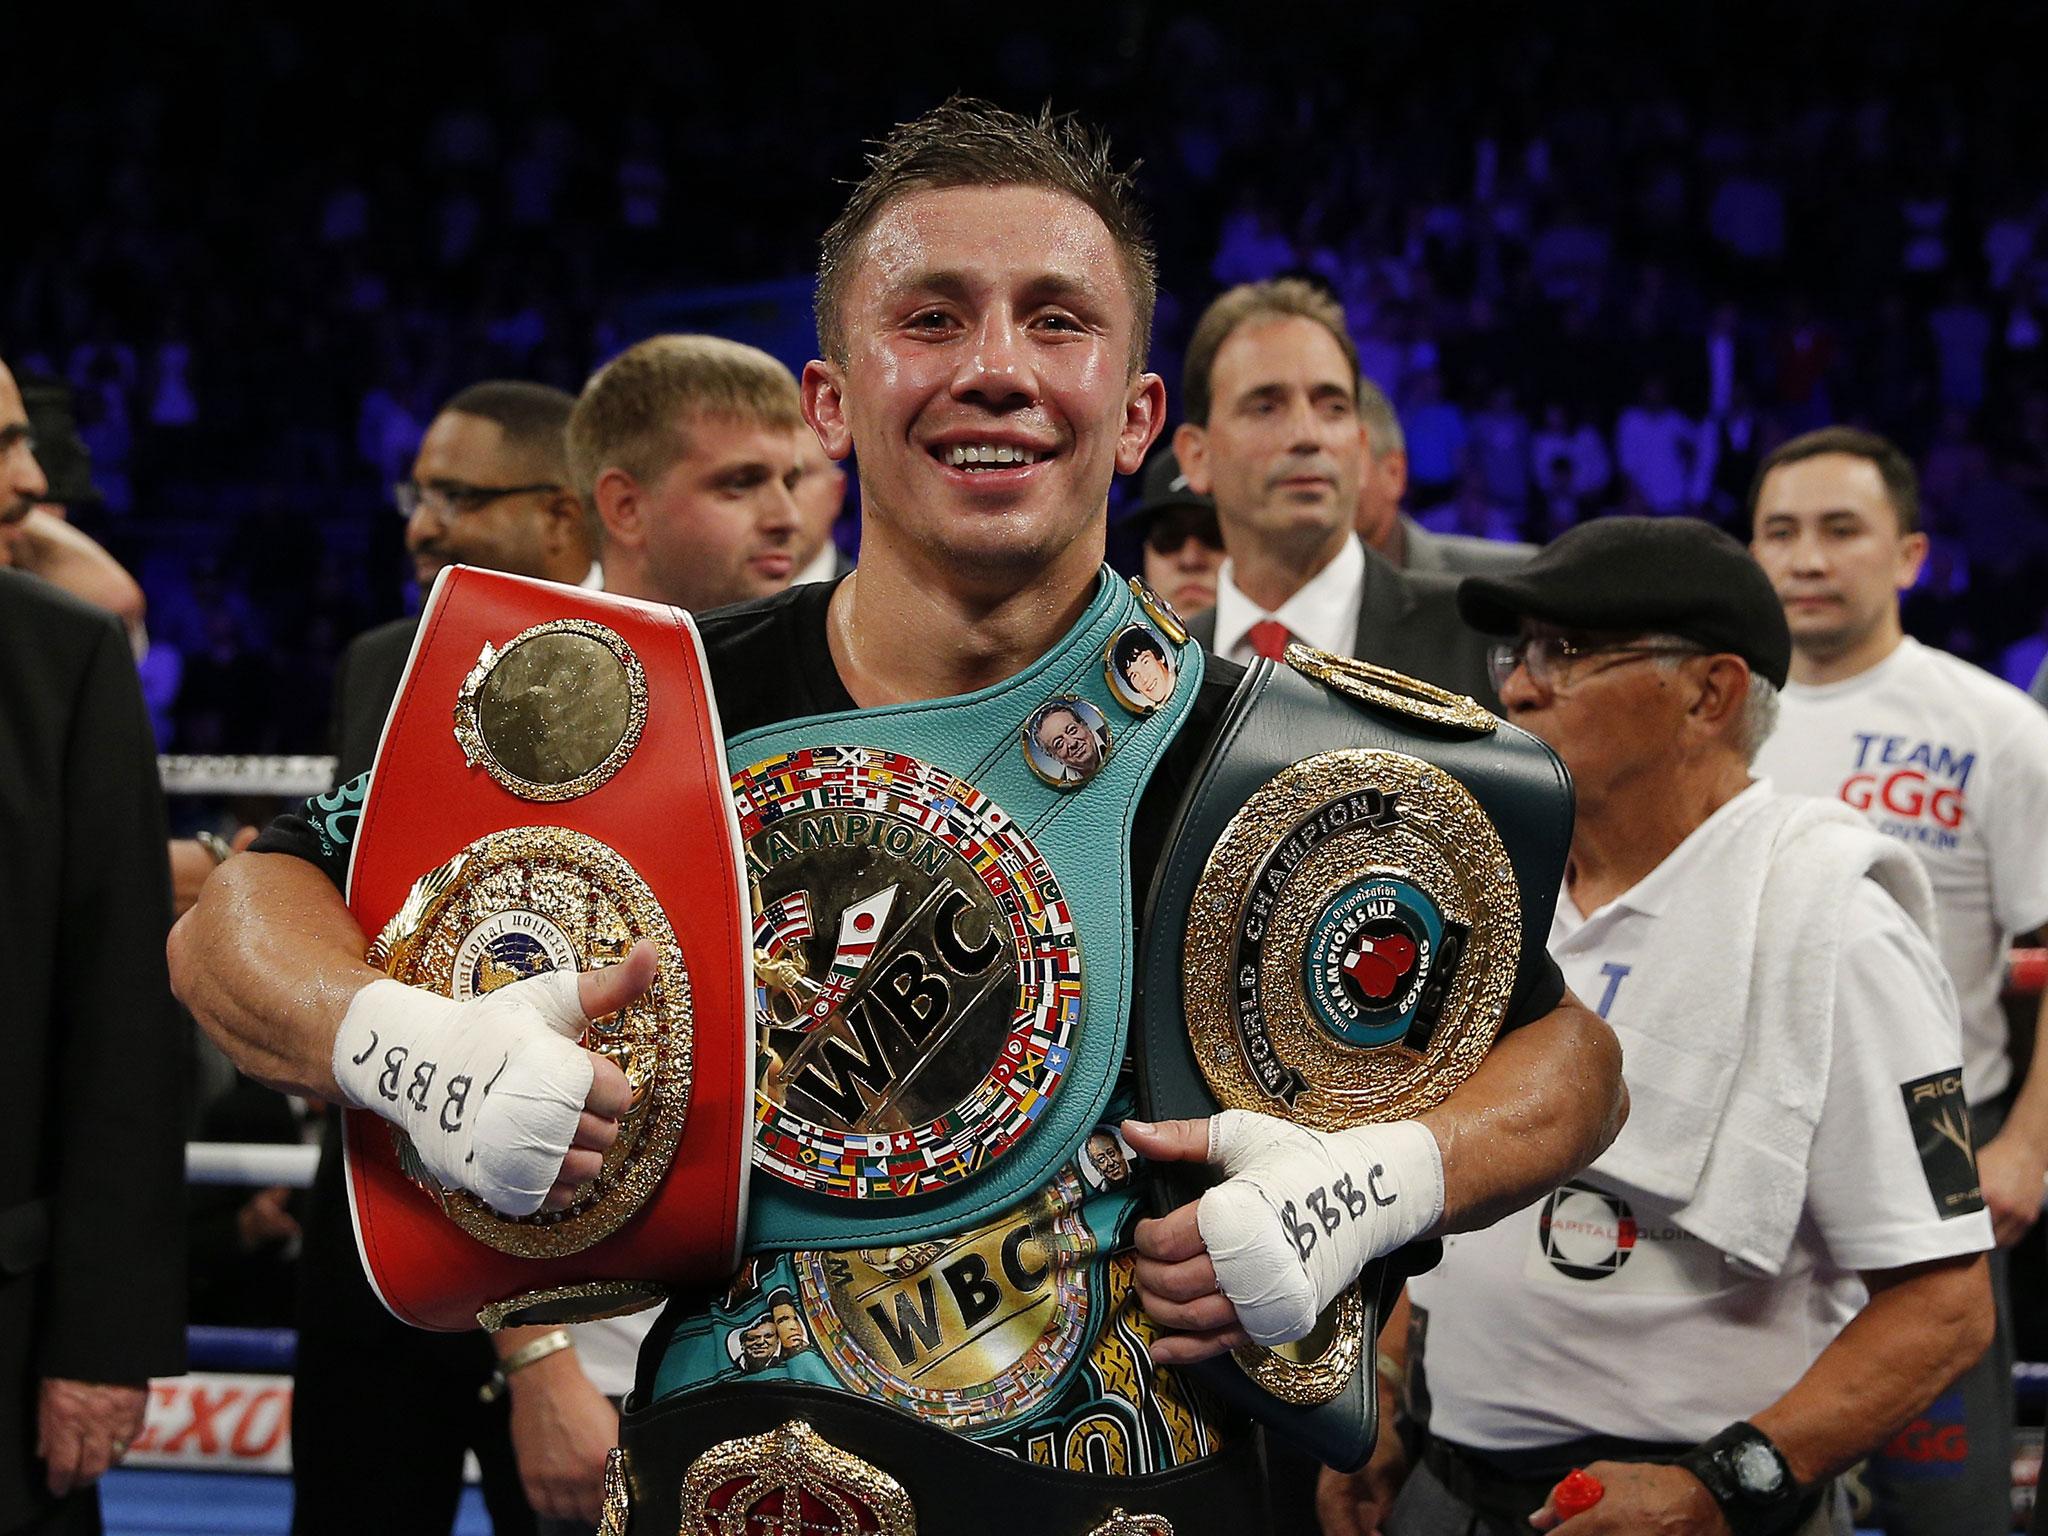 &#13;
Golovkin retained his WBC, IBF and IBO world middleweight titles after stopping Kell Brook in September &#13;